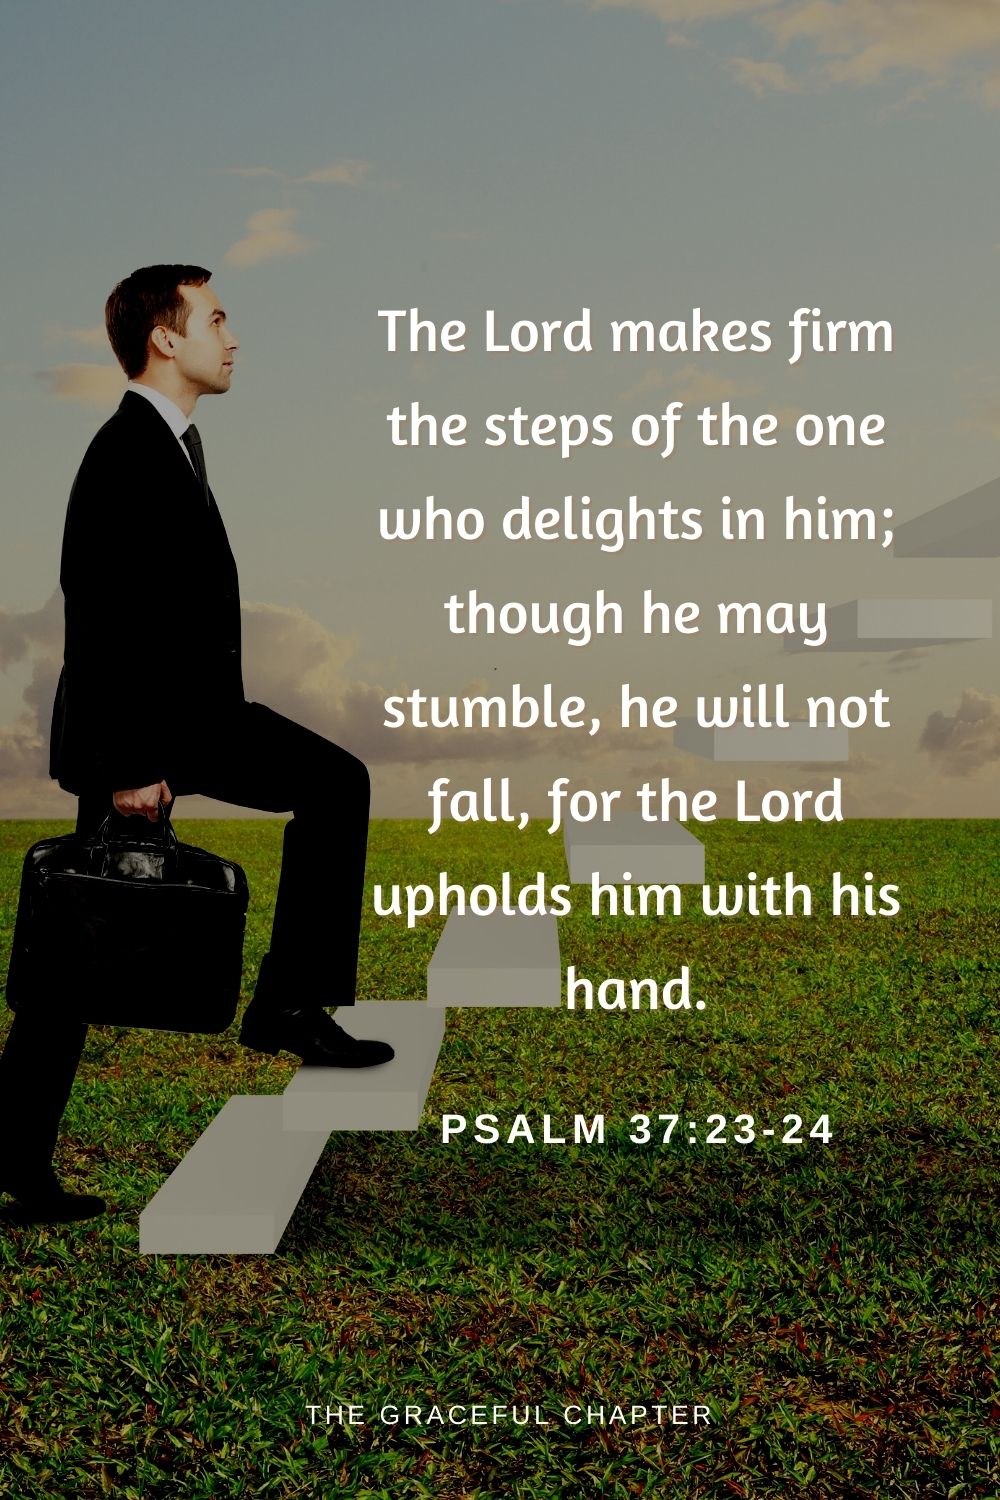 The Lord makes firm the steps of the one who delights in him; though he may stumble, he will not fall, for the Lord upholds him with his hand.